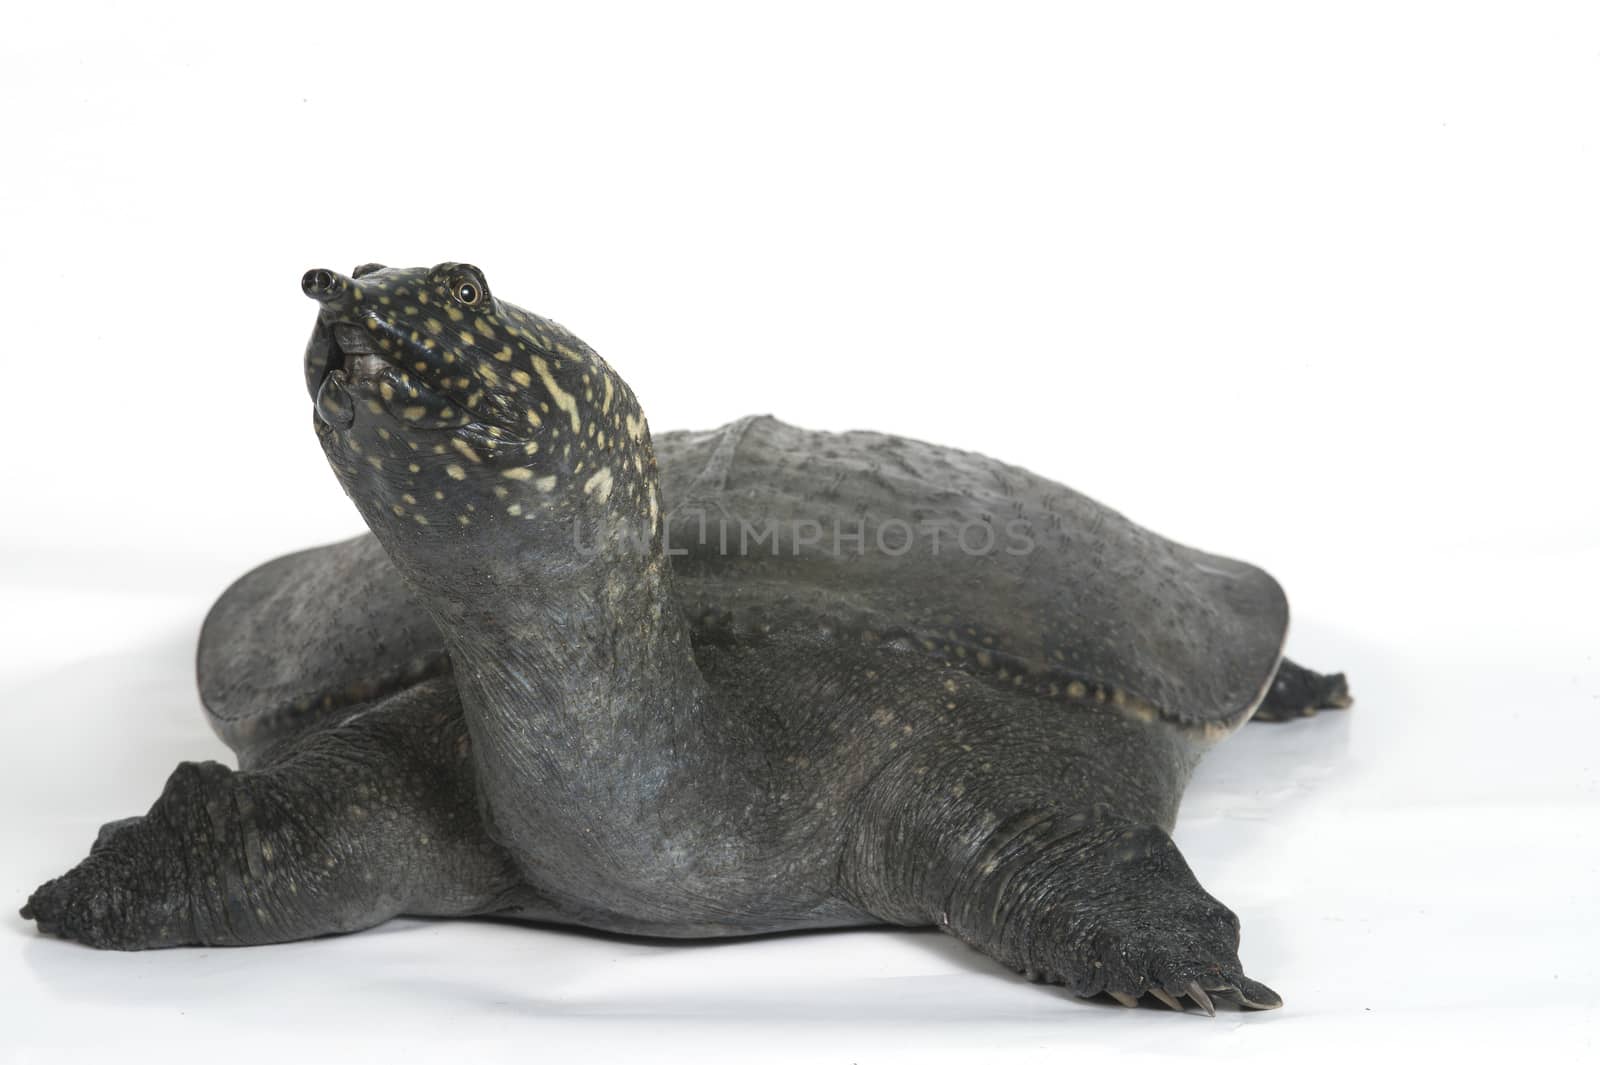 Chinese Soft Shell Turtle isolated on white background. by think4photop